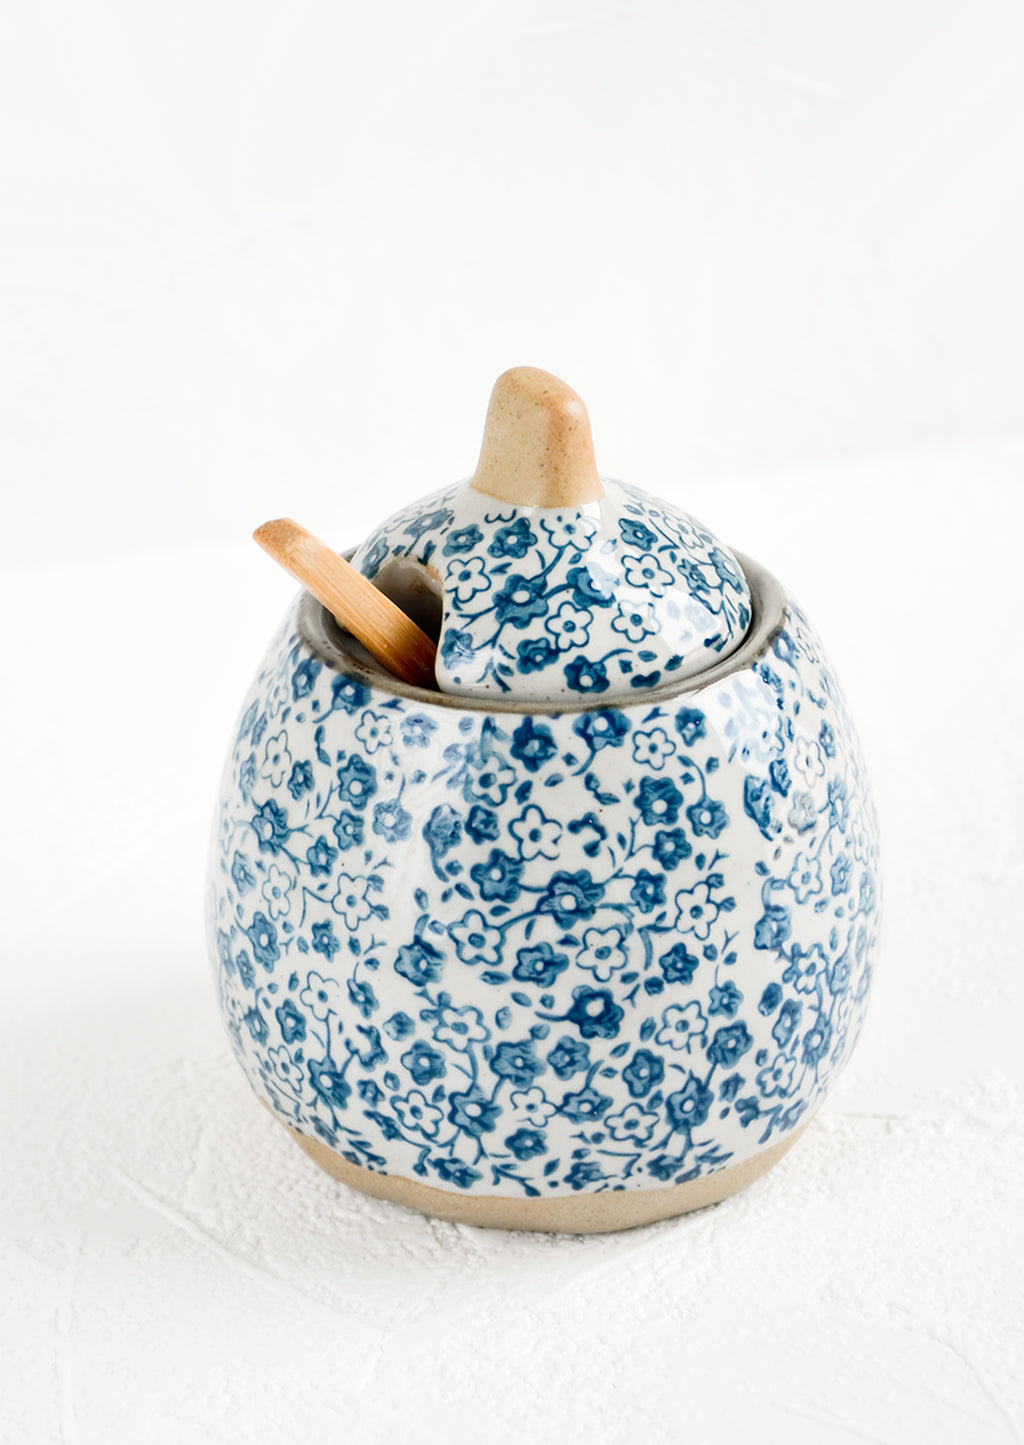 1: A lidded sugar jar with included spoon made of ceramic in grey with blue ditsy floral print.